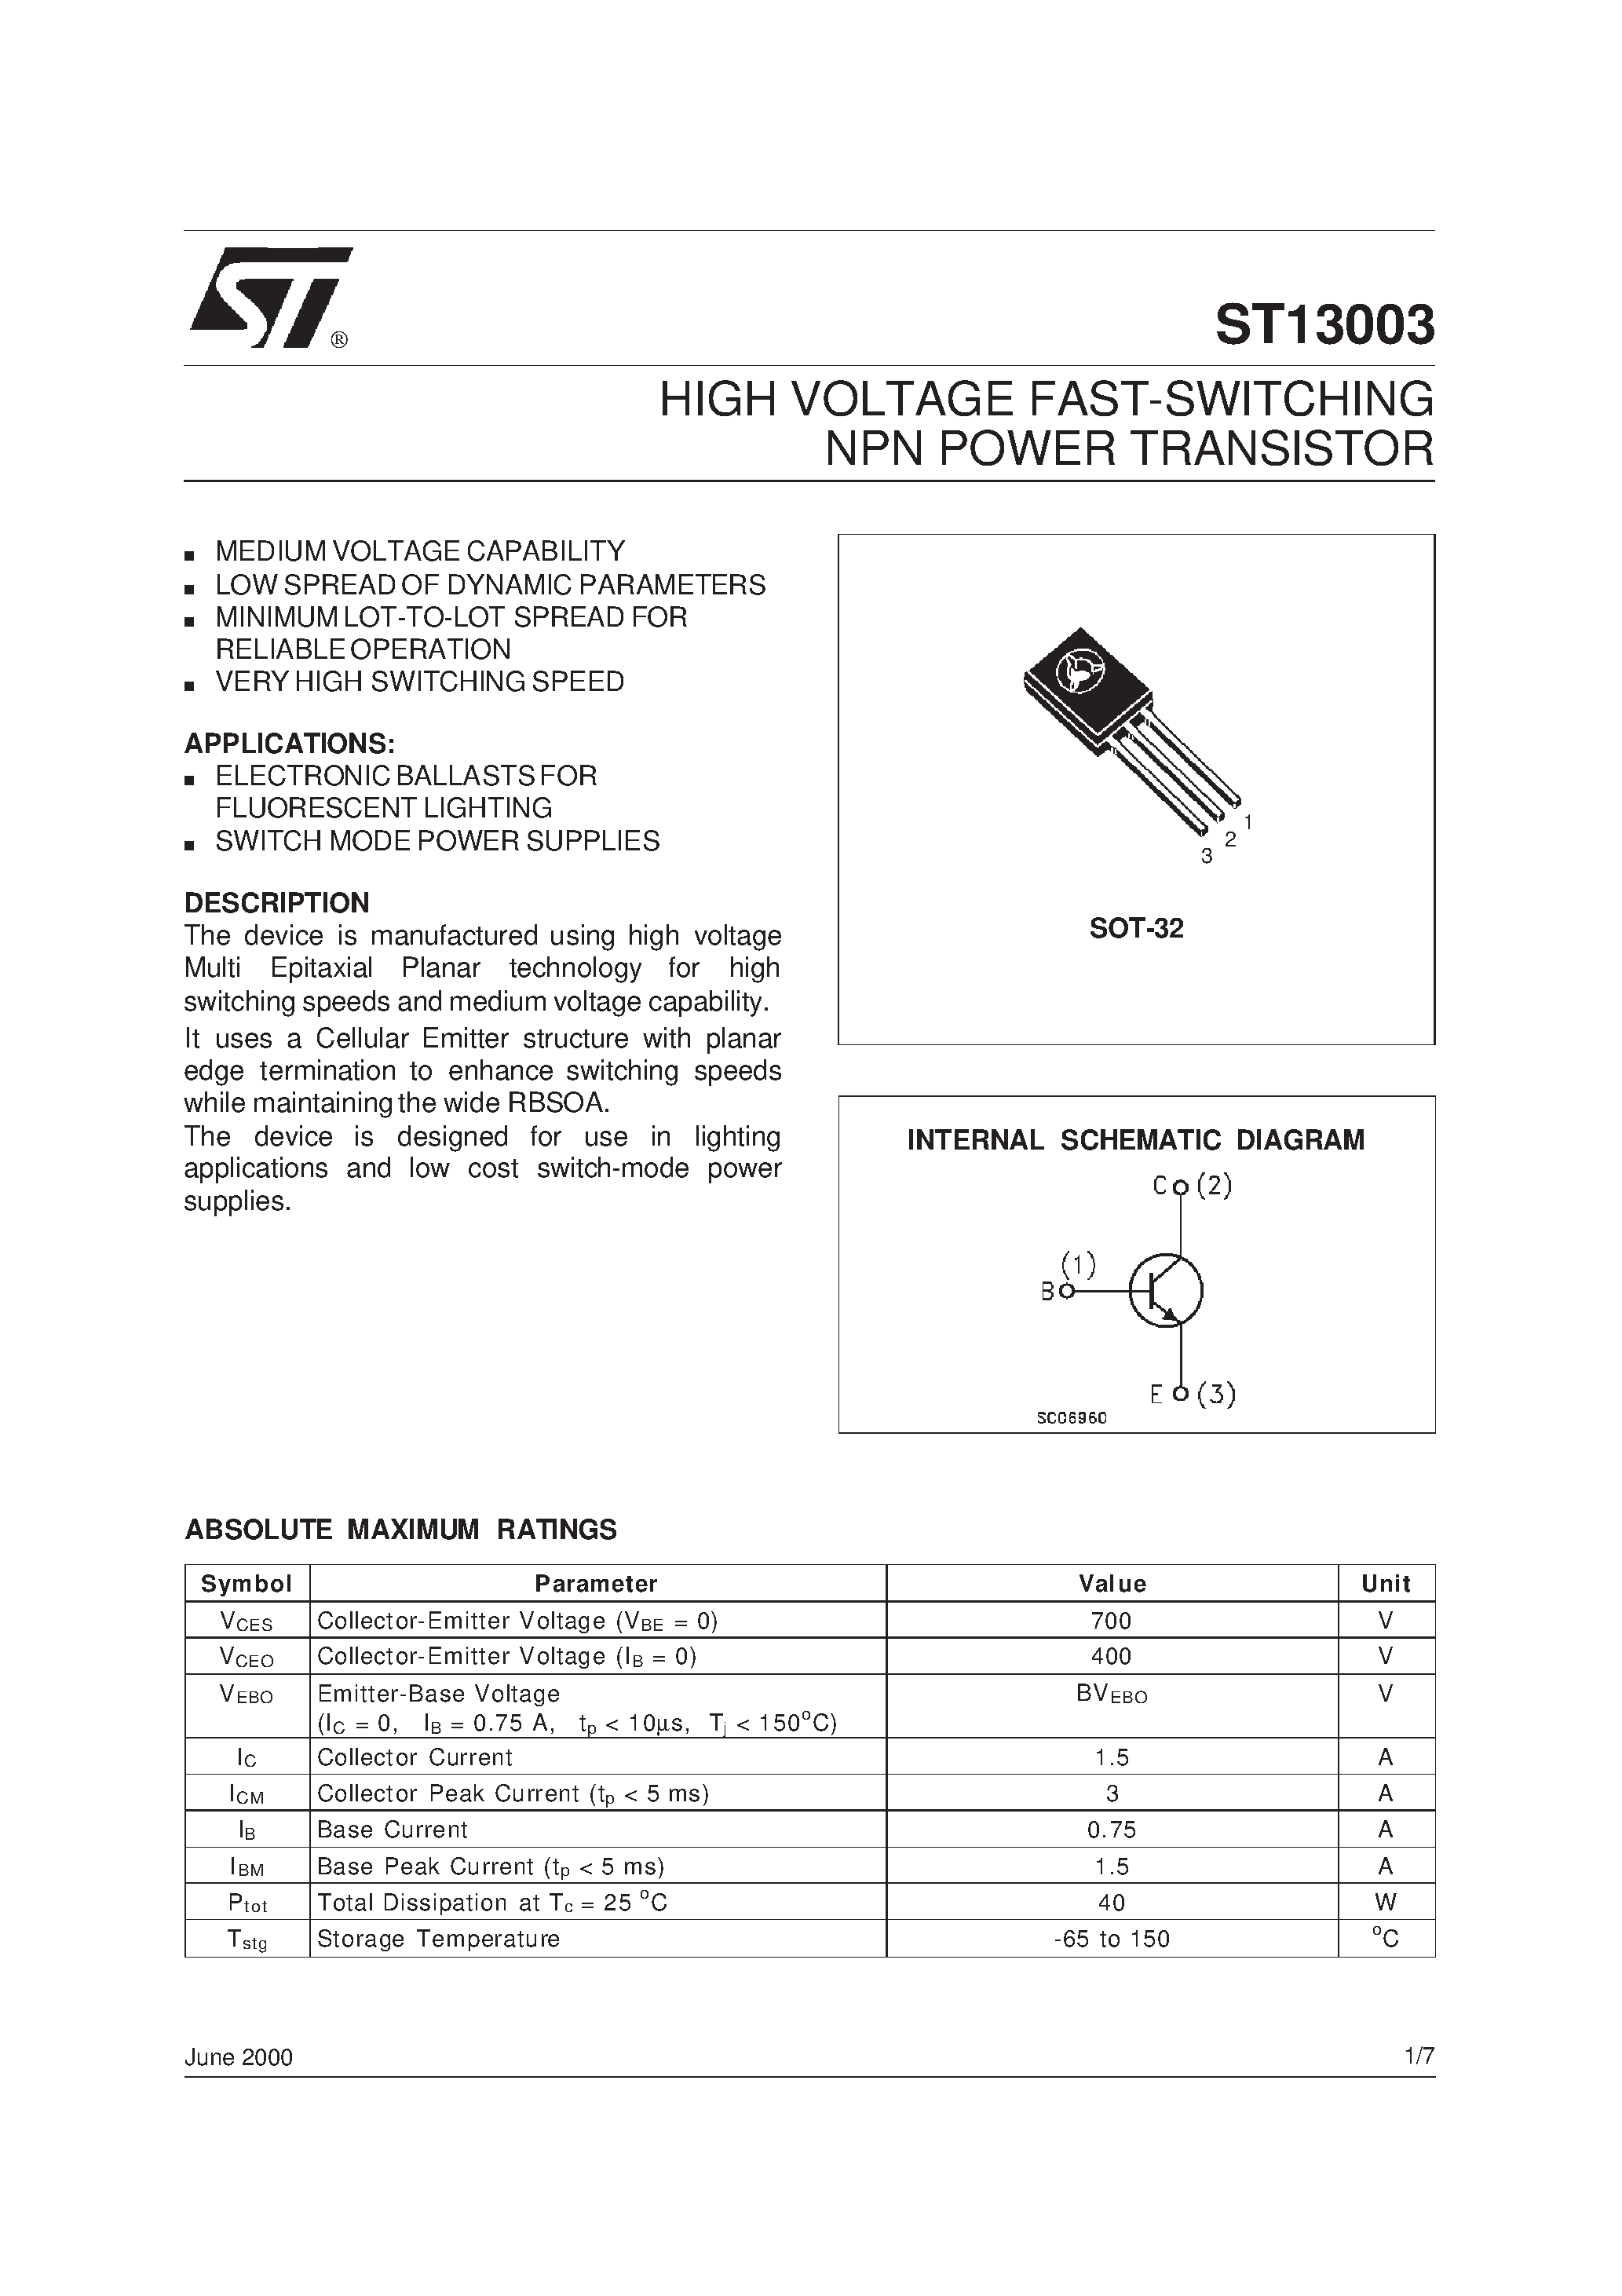 Datasheet ST13003 - HIGH VOLTAGE FAST-SWITCHING NPN POWER TRANSISTOR page 1